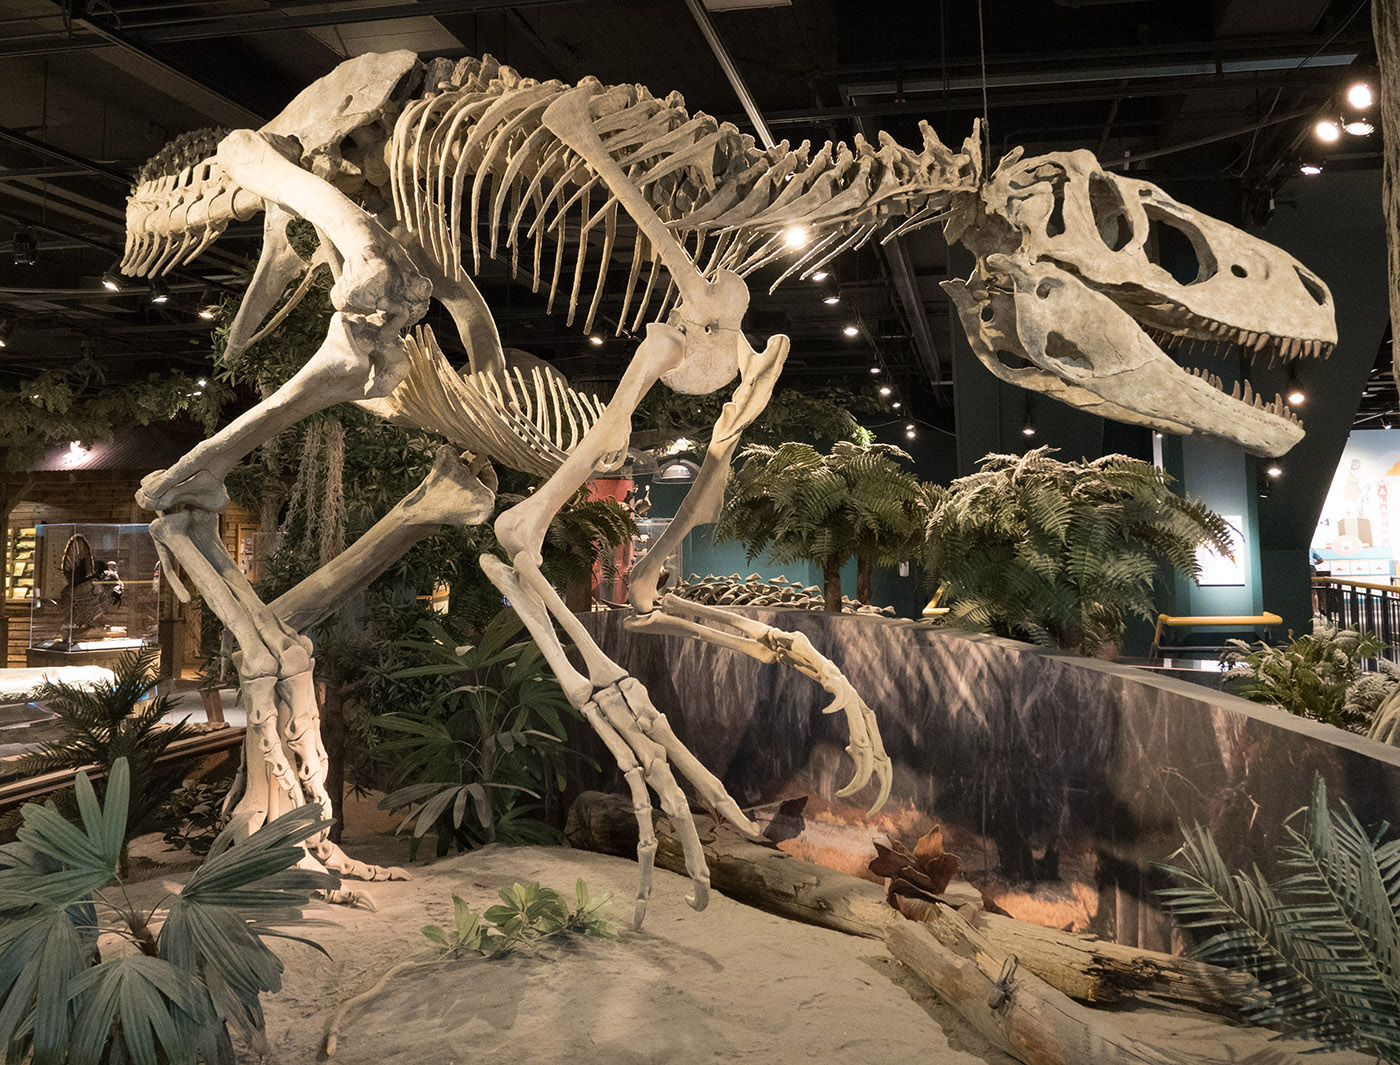 Reproduction of Appalachiosaurus mongomeriensis (Alabama Tyrannosaur) in McWane Science Center.  Fossils were found in Montgomery County.  It was over 10 feet high and 22 feet long and the predominant predator in Alabama during the late Cretaceous Period.